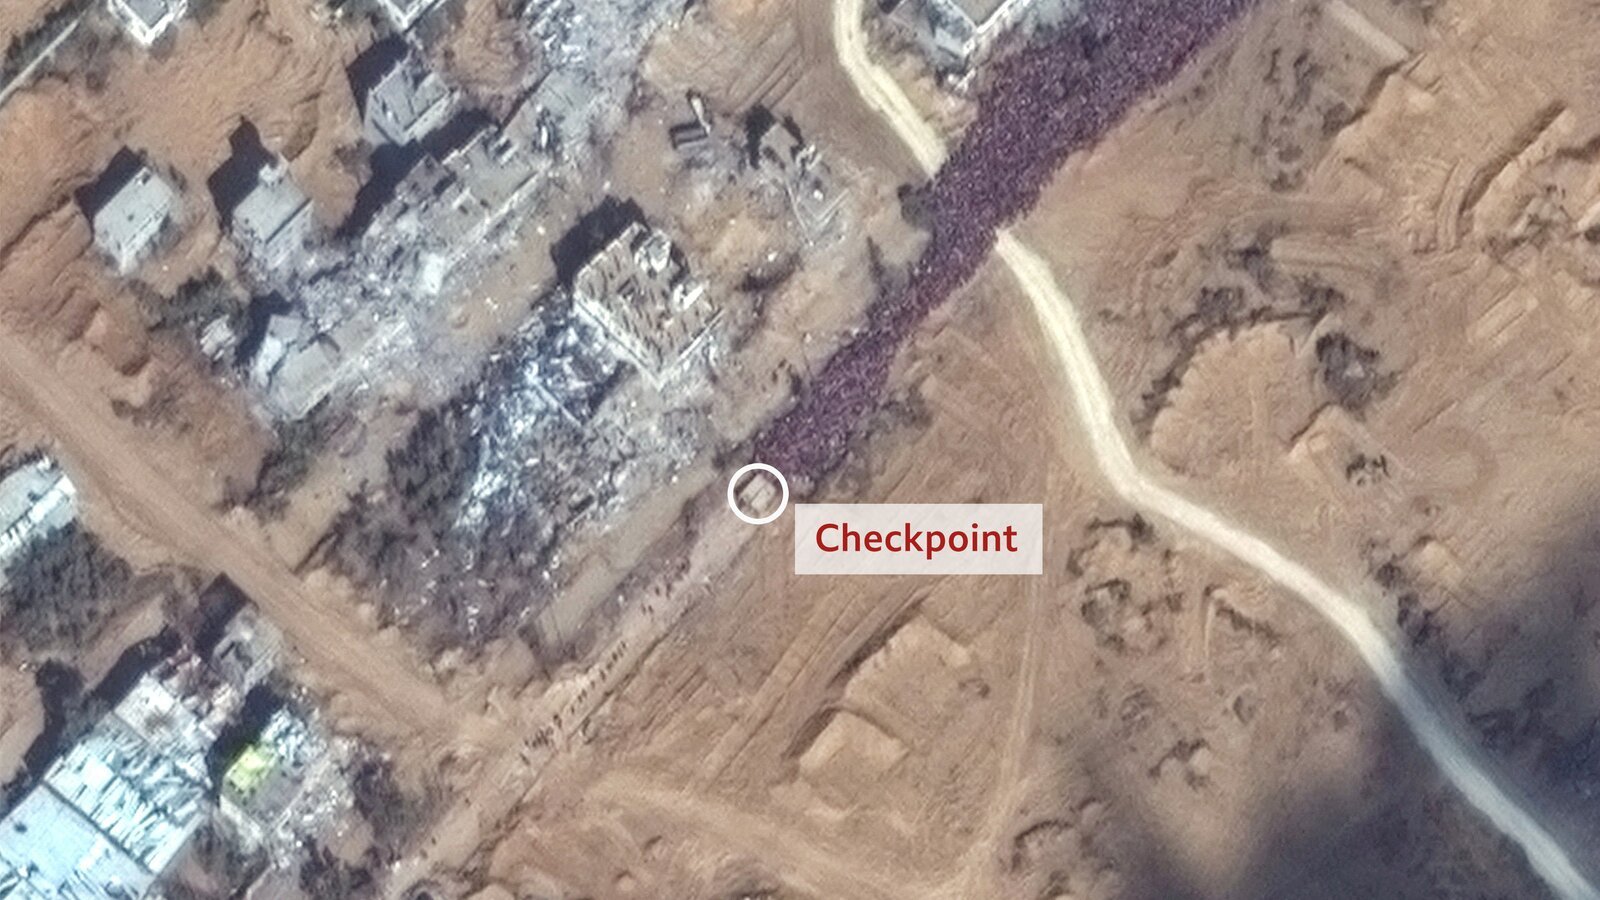 The Israeli checkpoint on the Salah al-Din road that Jehad and his family passed through. There is a huge crowd of people waiting to go through it.